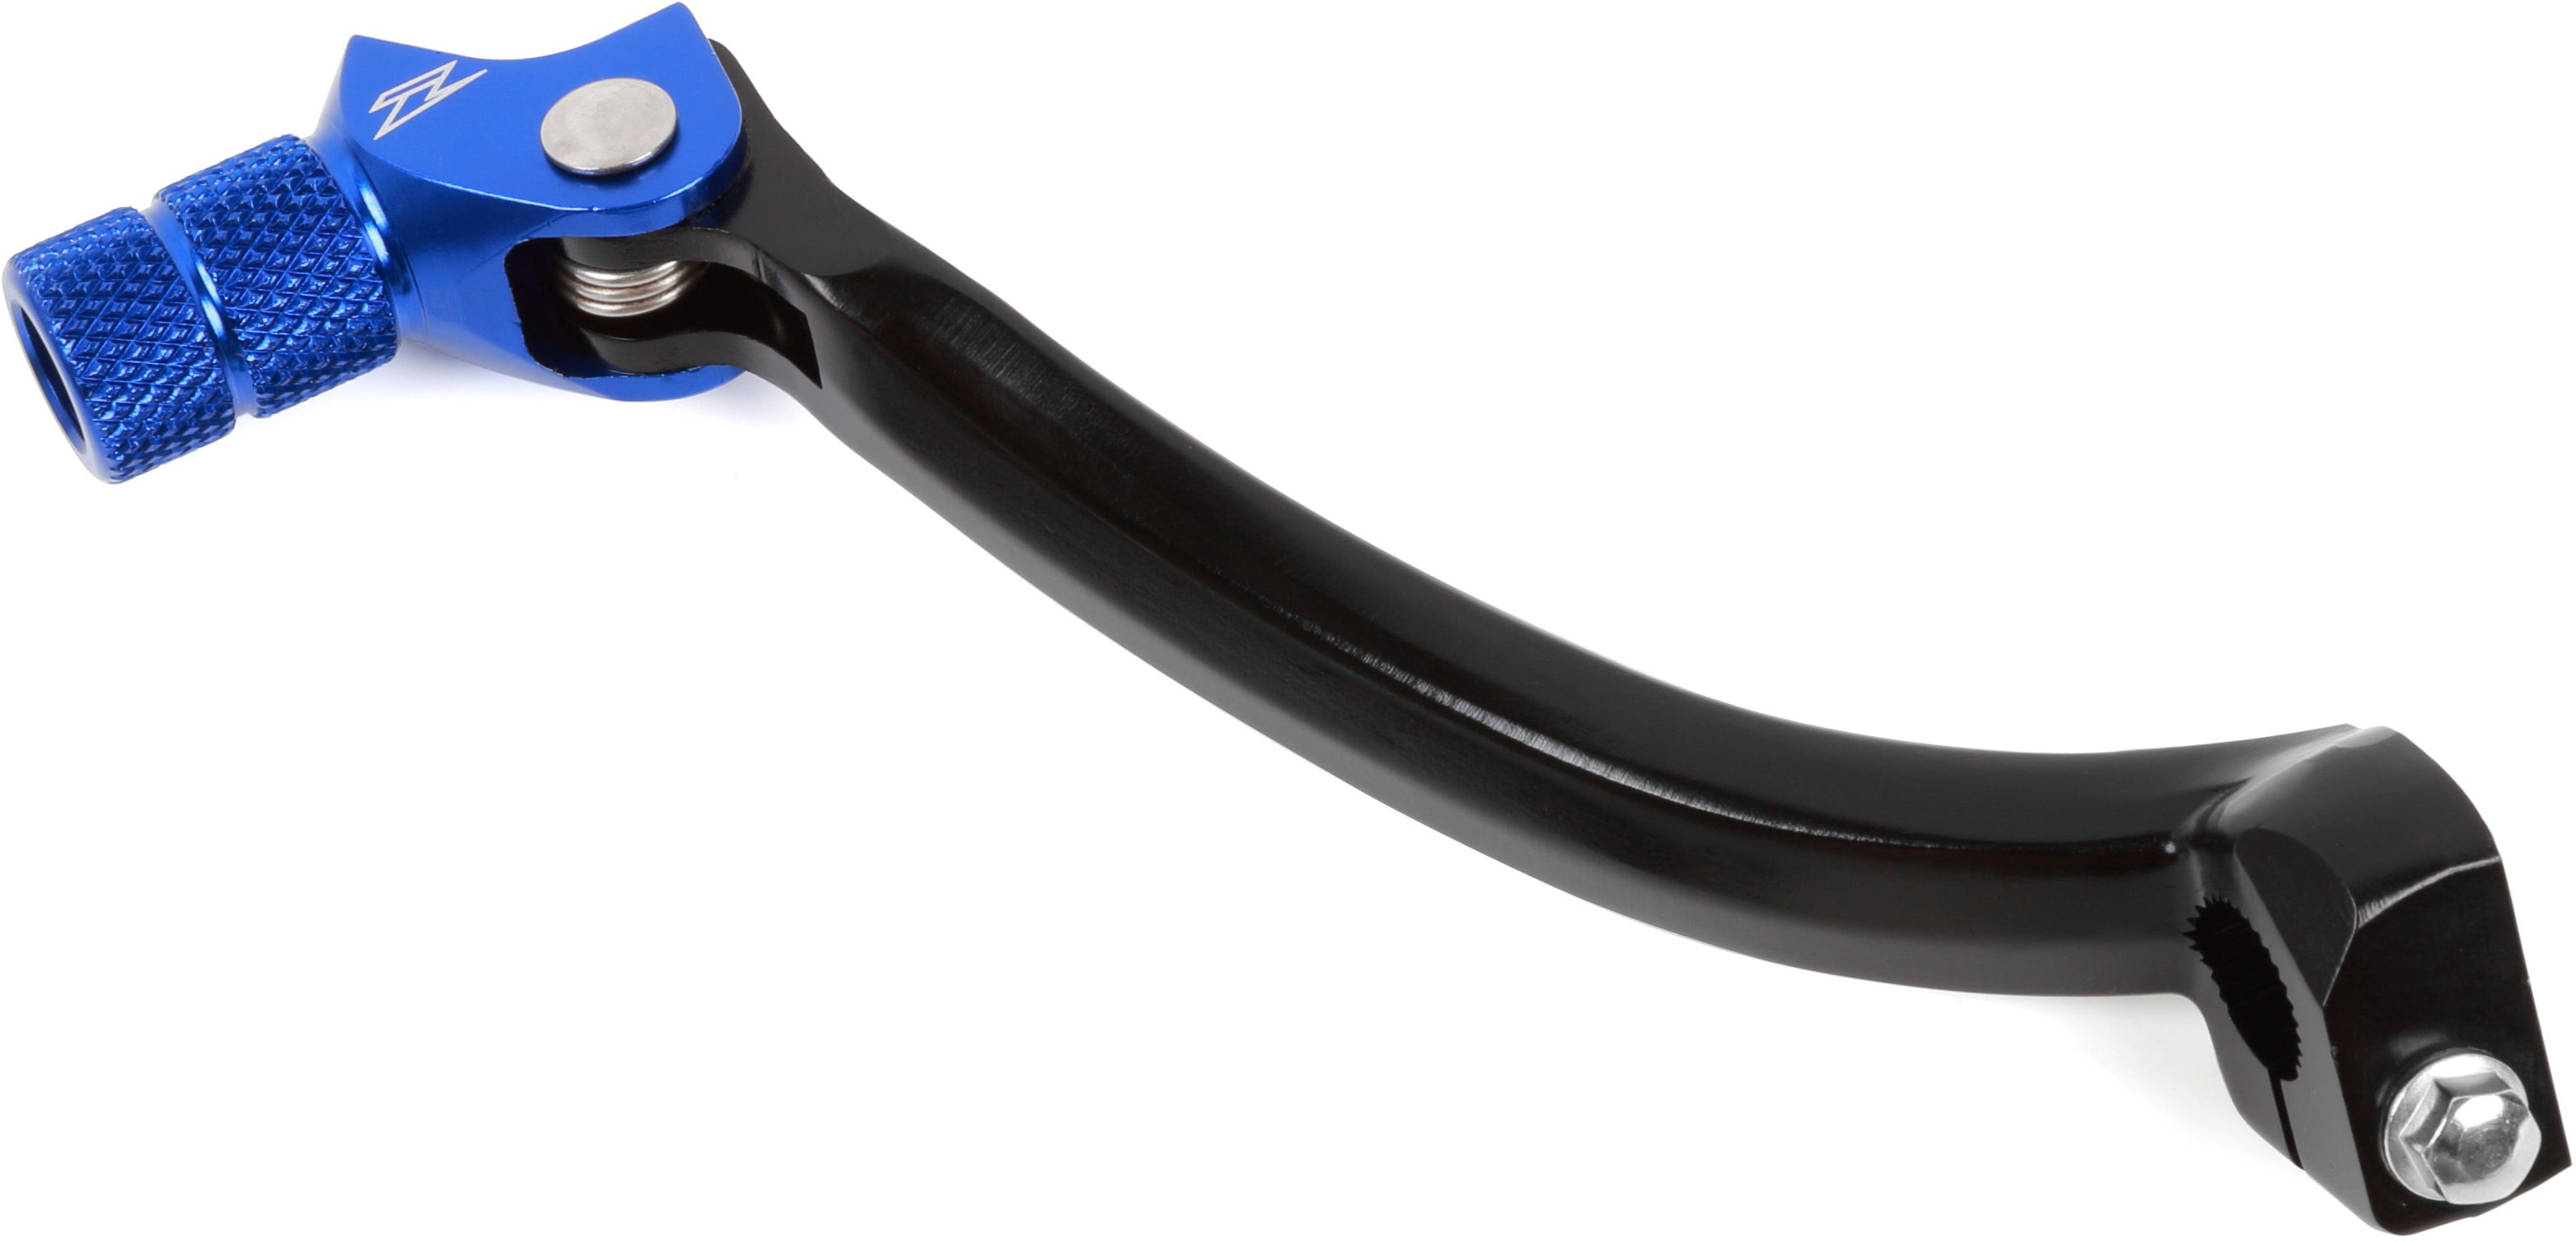 Blue Forged Shift Lever for YZ85 07-20, YZ125 96-04, and YZ250 89-04 Motorcycle Models